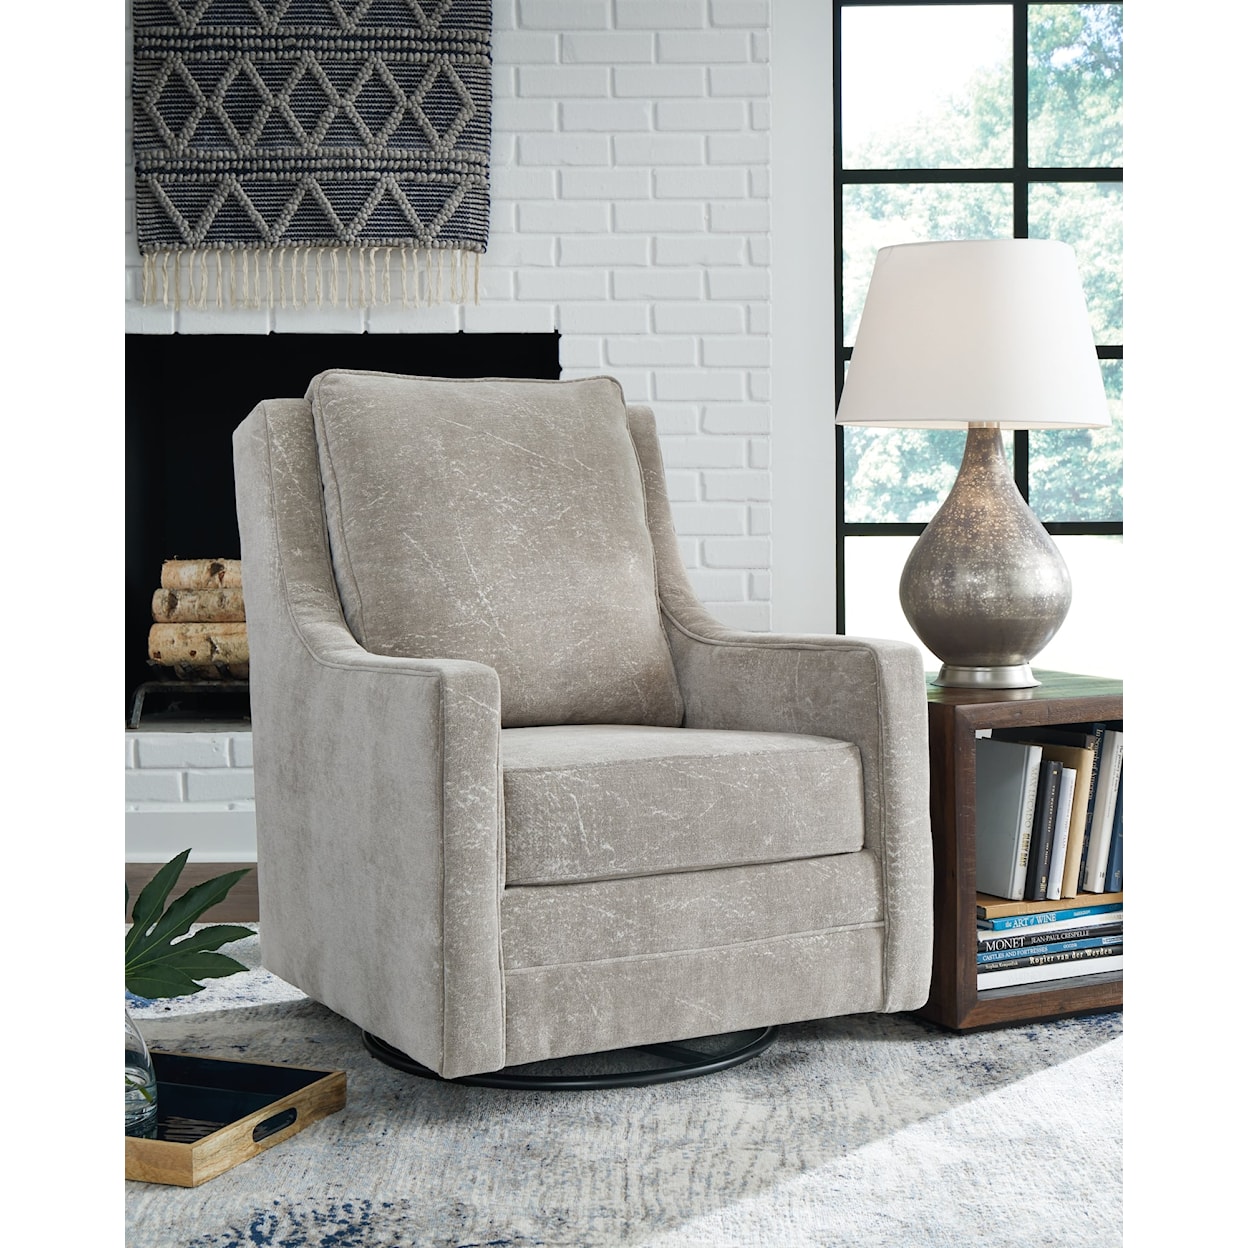 Signature Design by Ashley Kambria Cammie Accent Chair